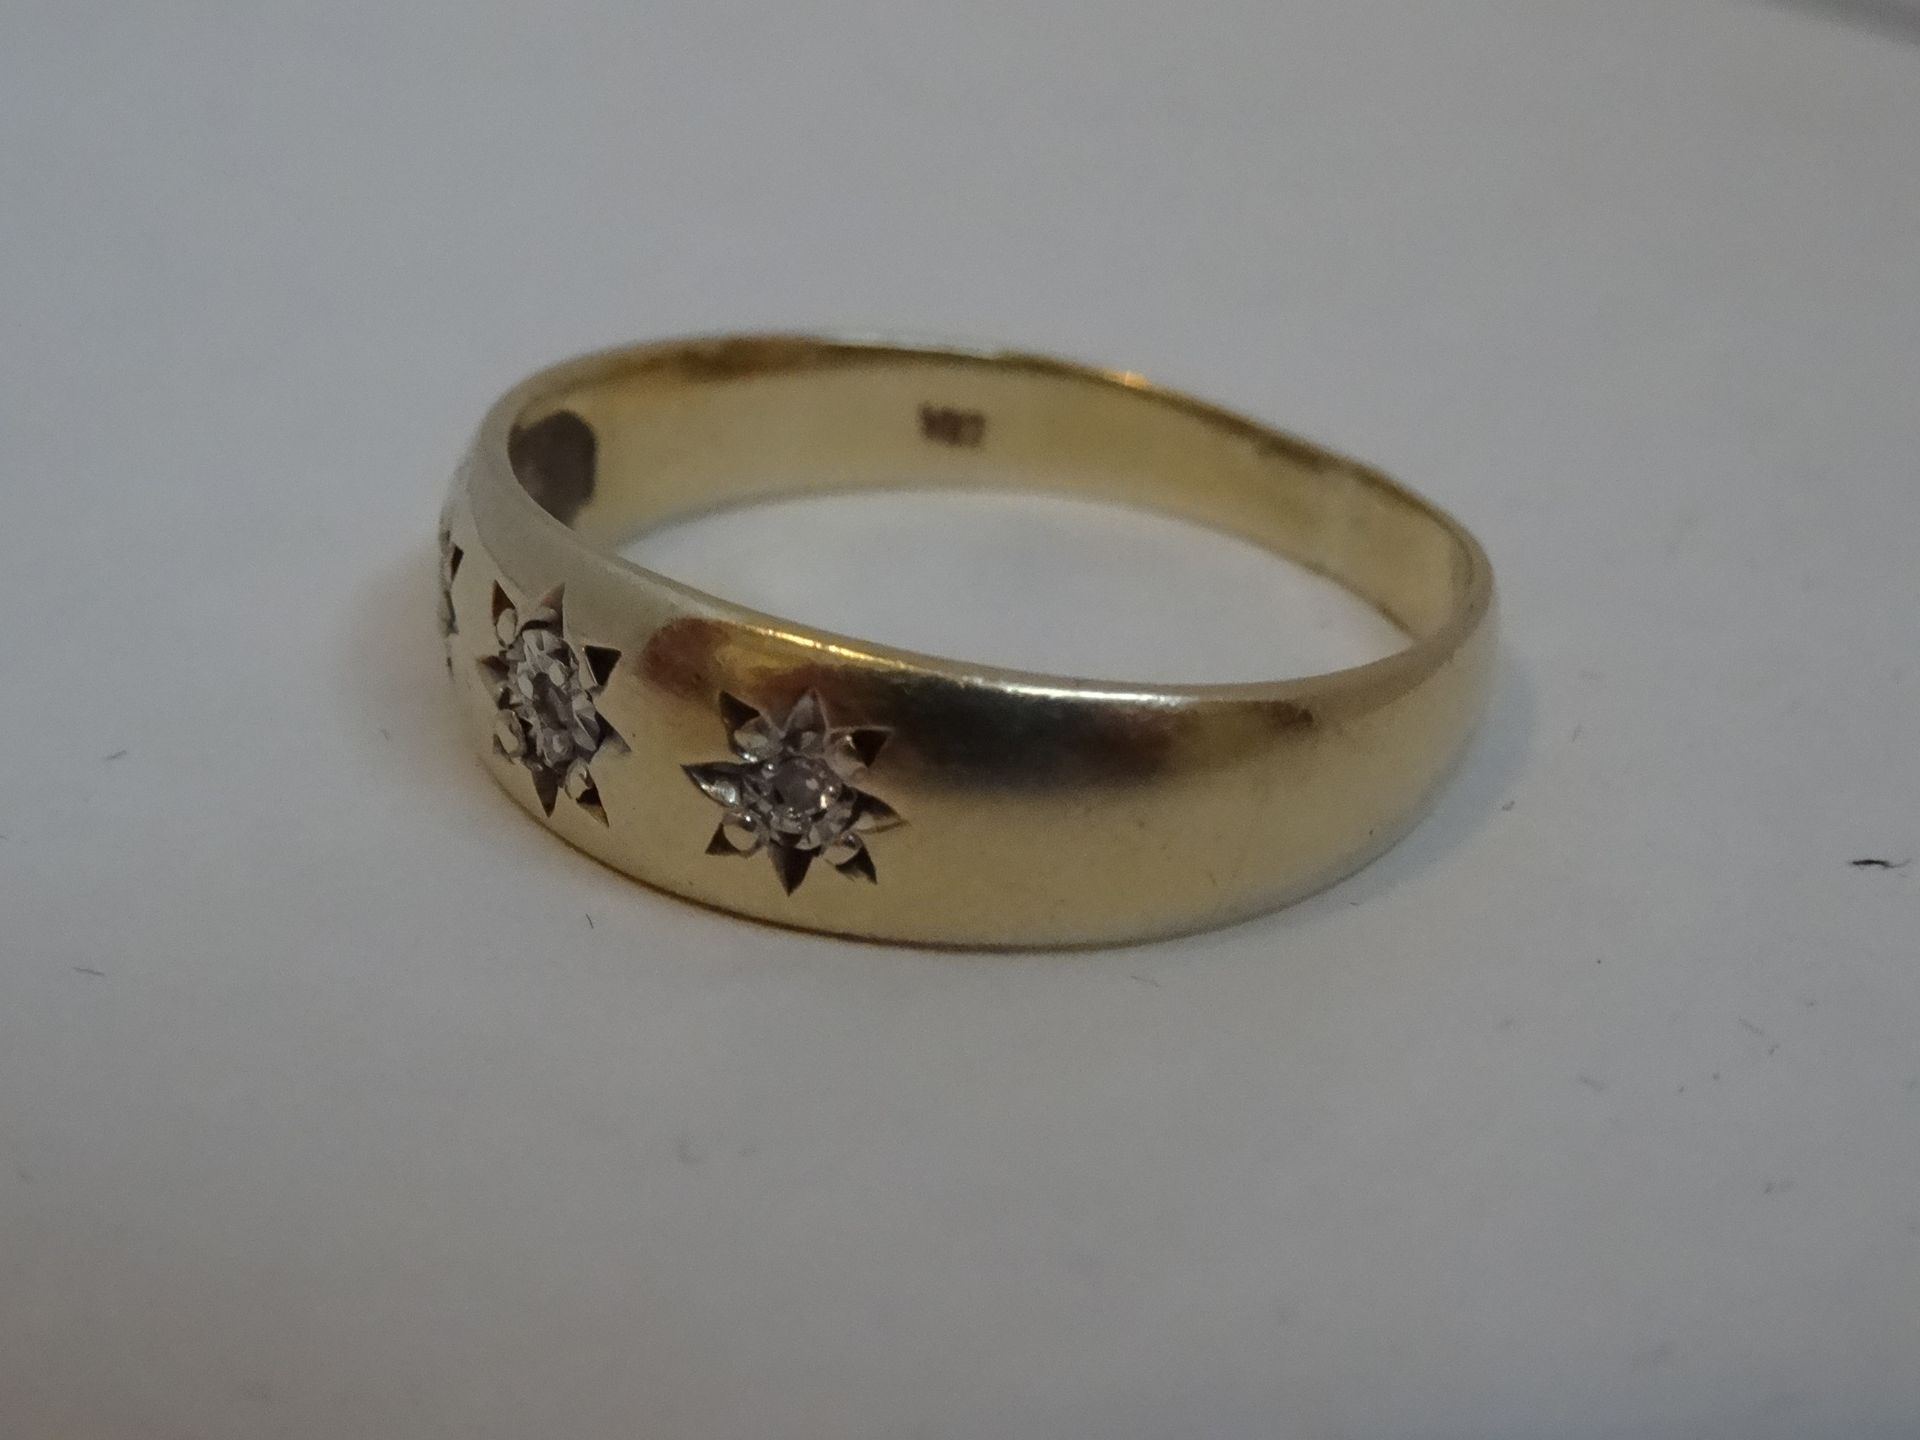 9 Carat Gold Diamond Band Ring Set with 3 Diamonds. Total Piece Weight 2.49 Grams - Image 2 of 3